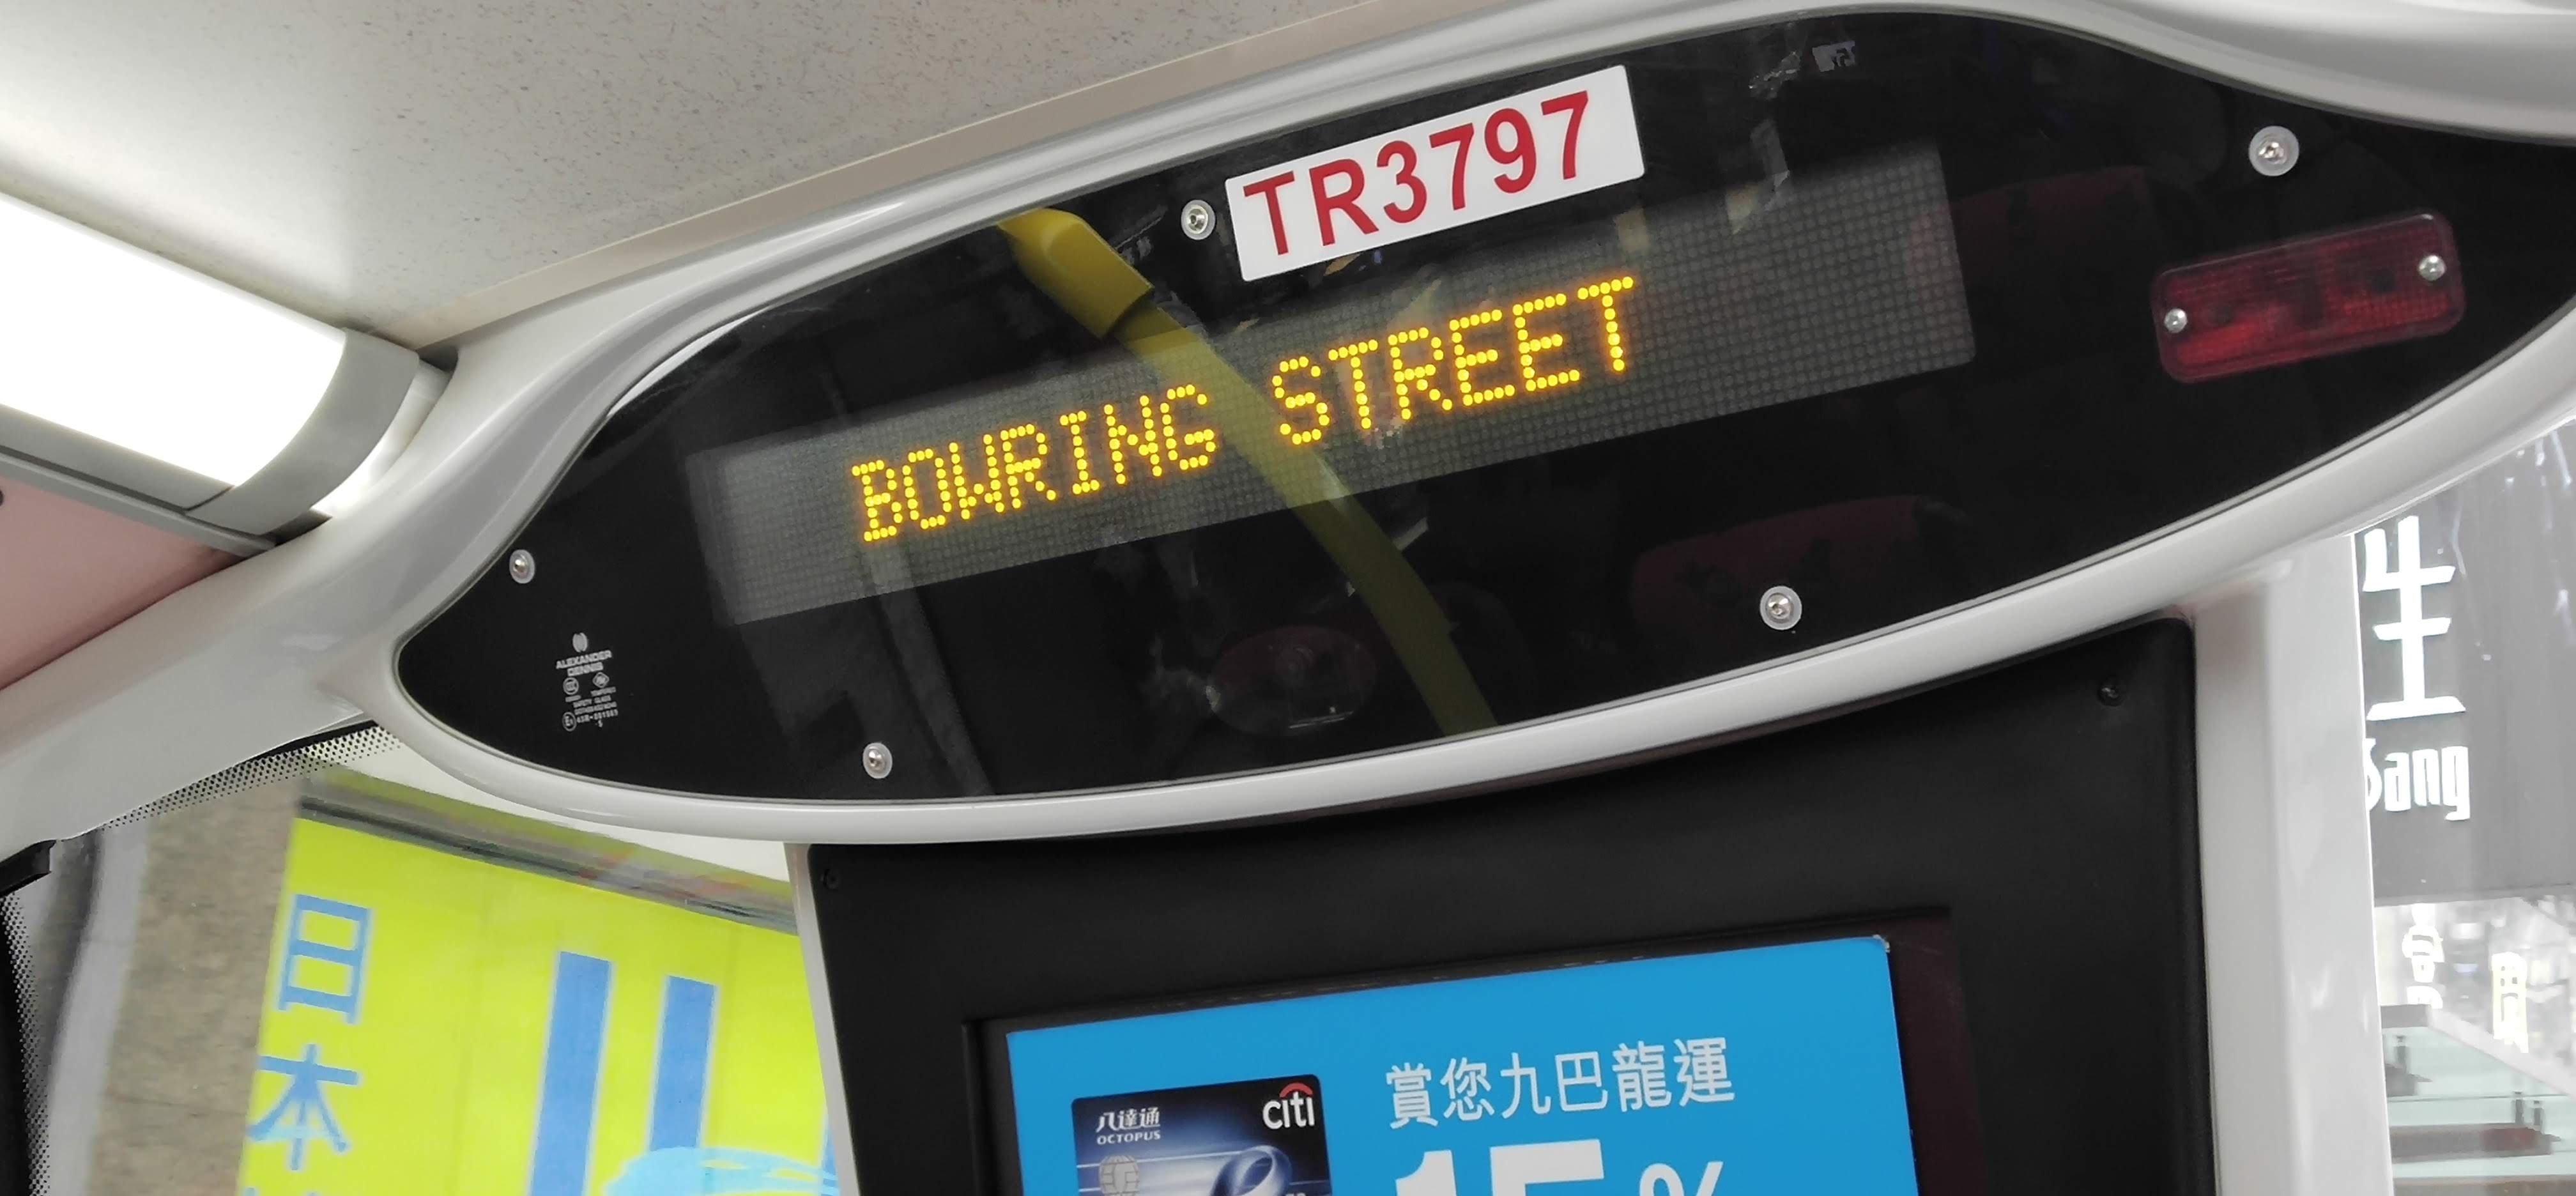 Screen of the trilingual announcement system in the bus